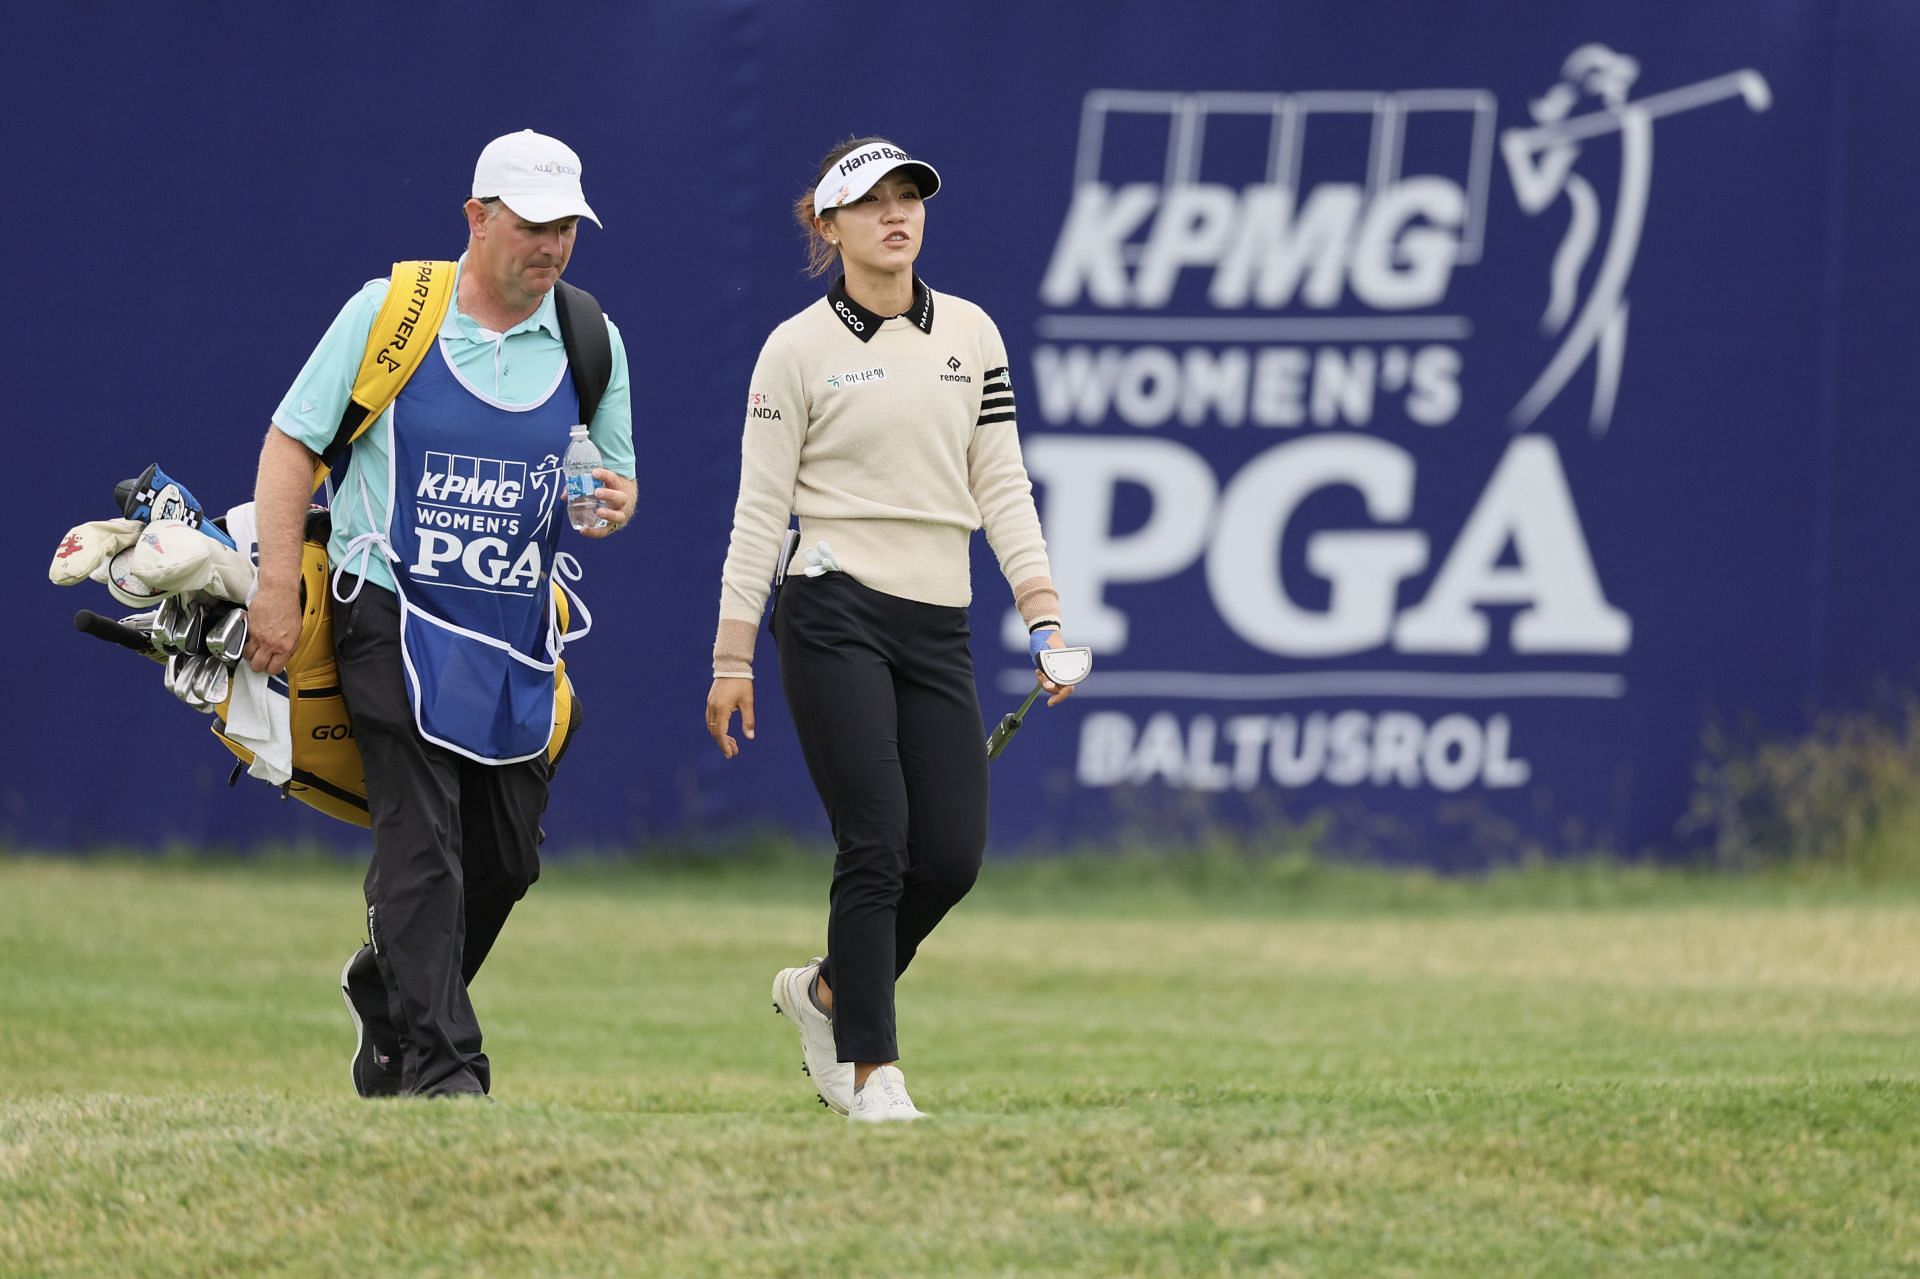 How to watch LPGAs KPMG Womens PGA Championship 2023 for free today? Streaming options explored